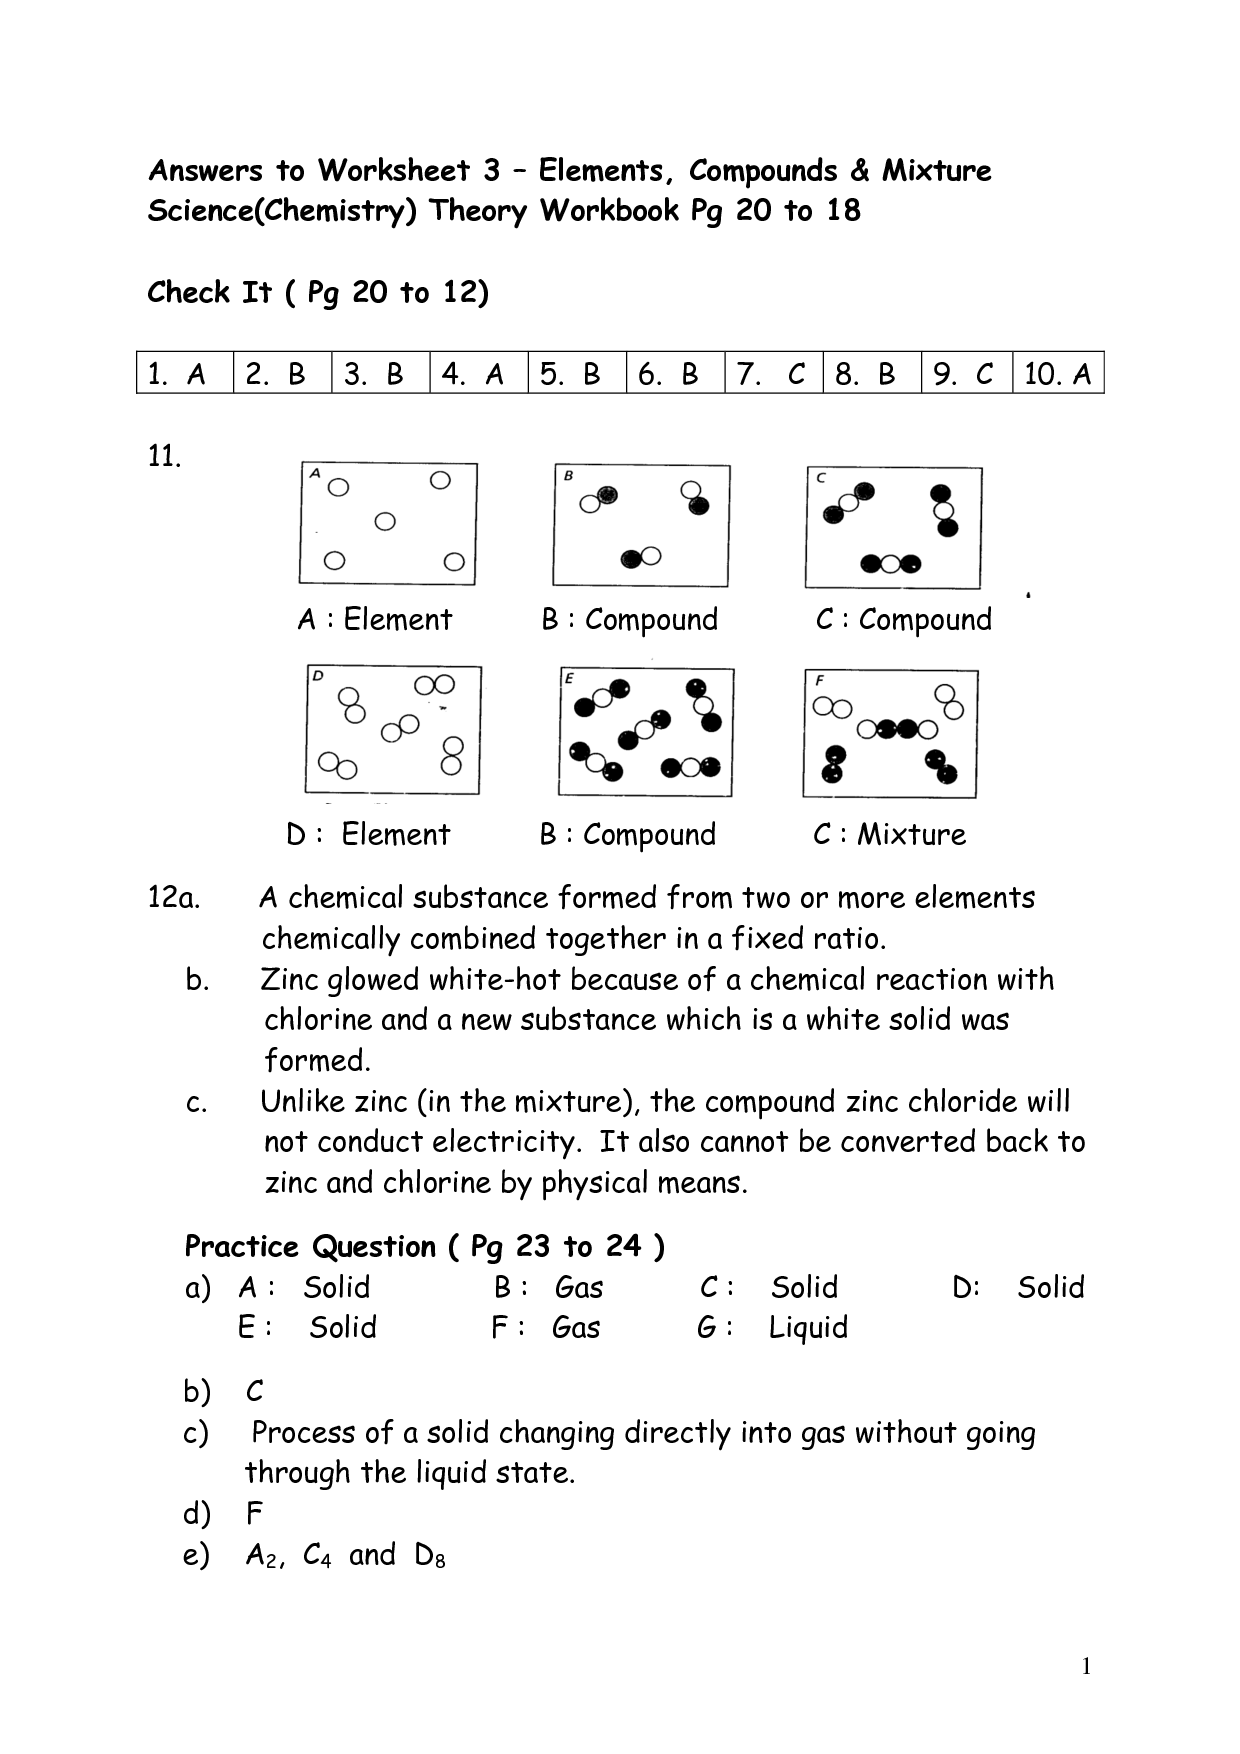 18 Best Images of Worksheets Compound And Elements Printable  Elements Compounds and Mixtures 